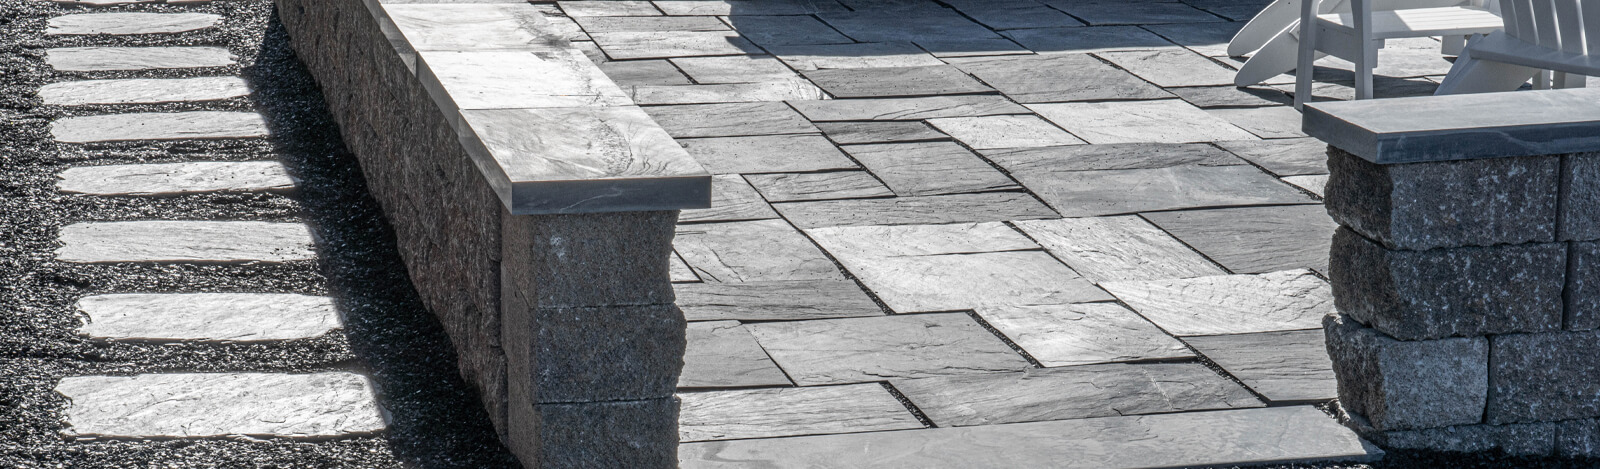 patio stepping stones made of slate